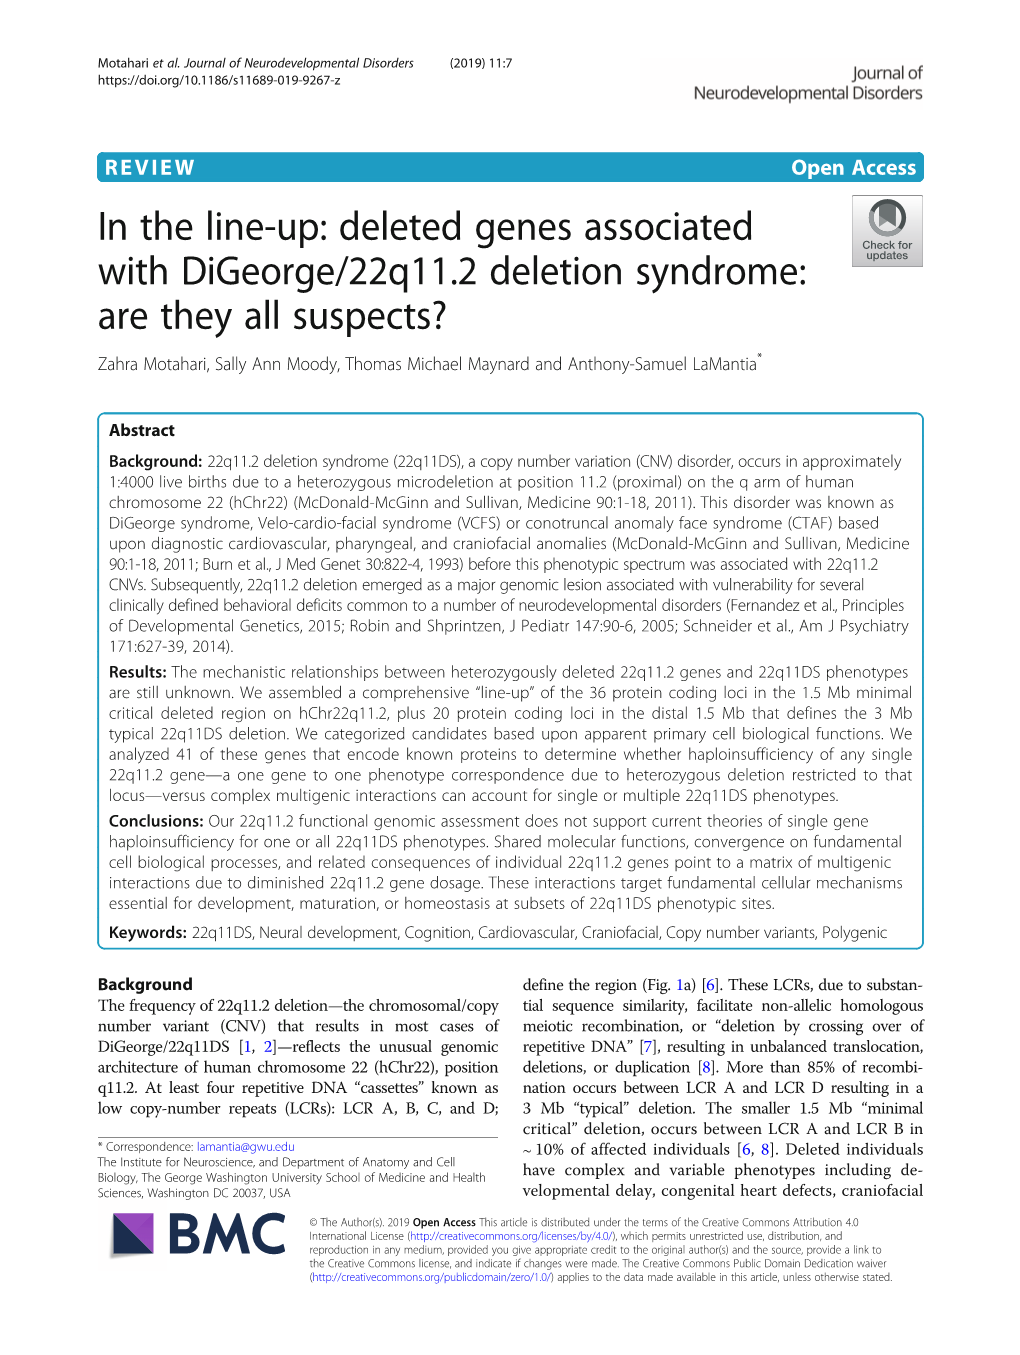 Deleted Genes Associated with Digeorge/22Q11.2 Deletion Syndrome